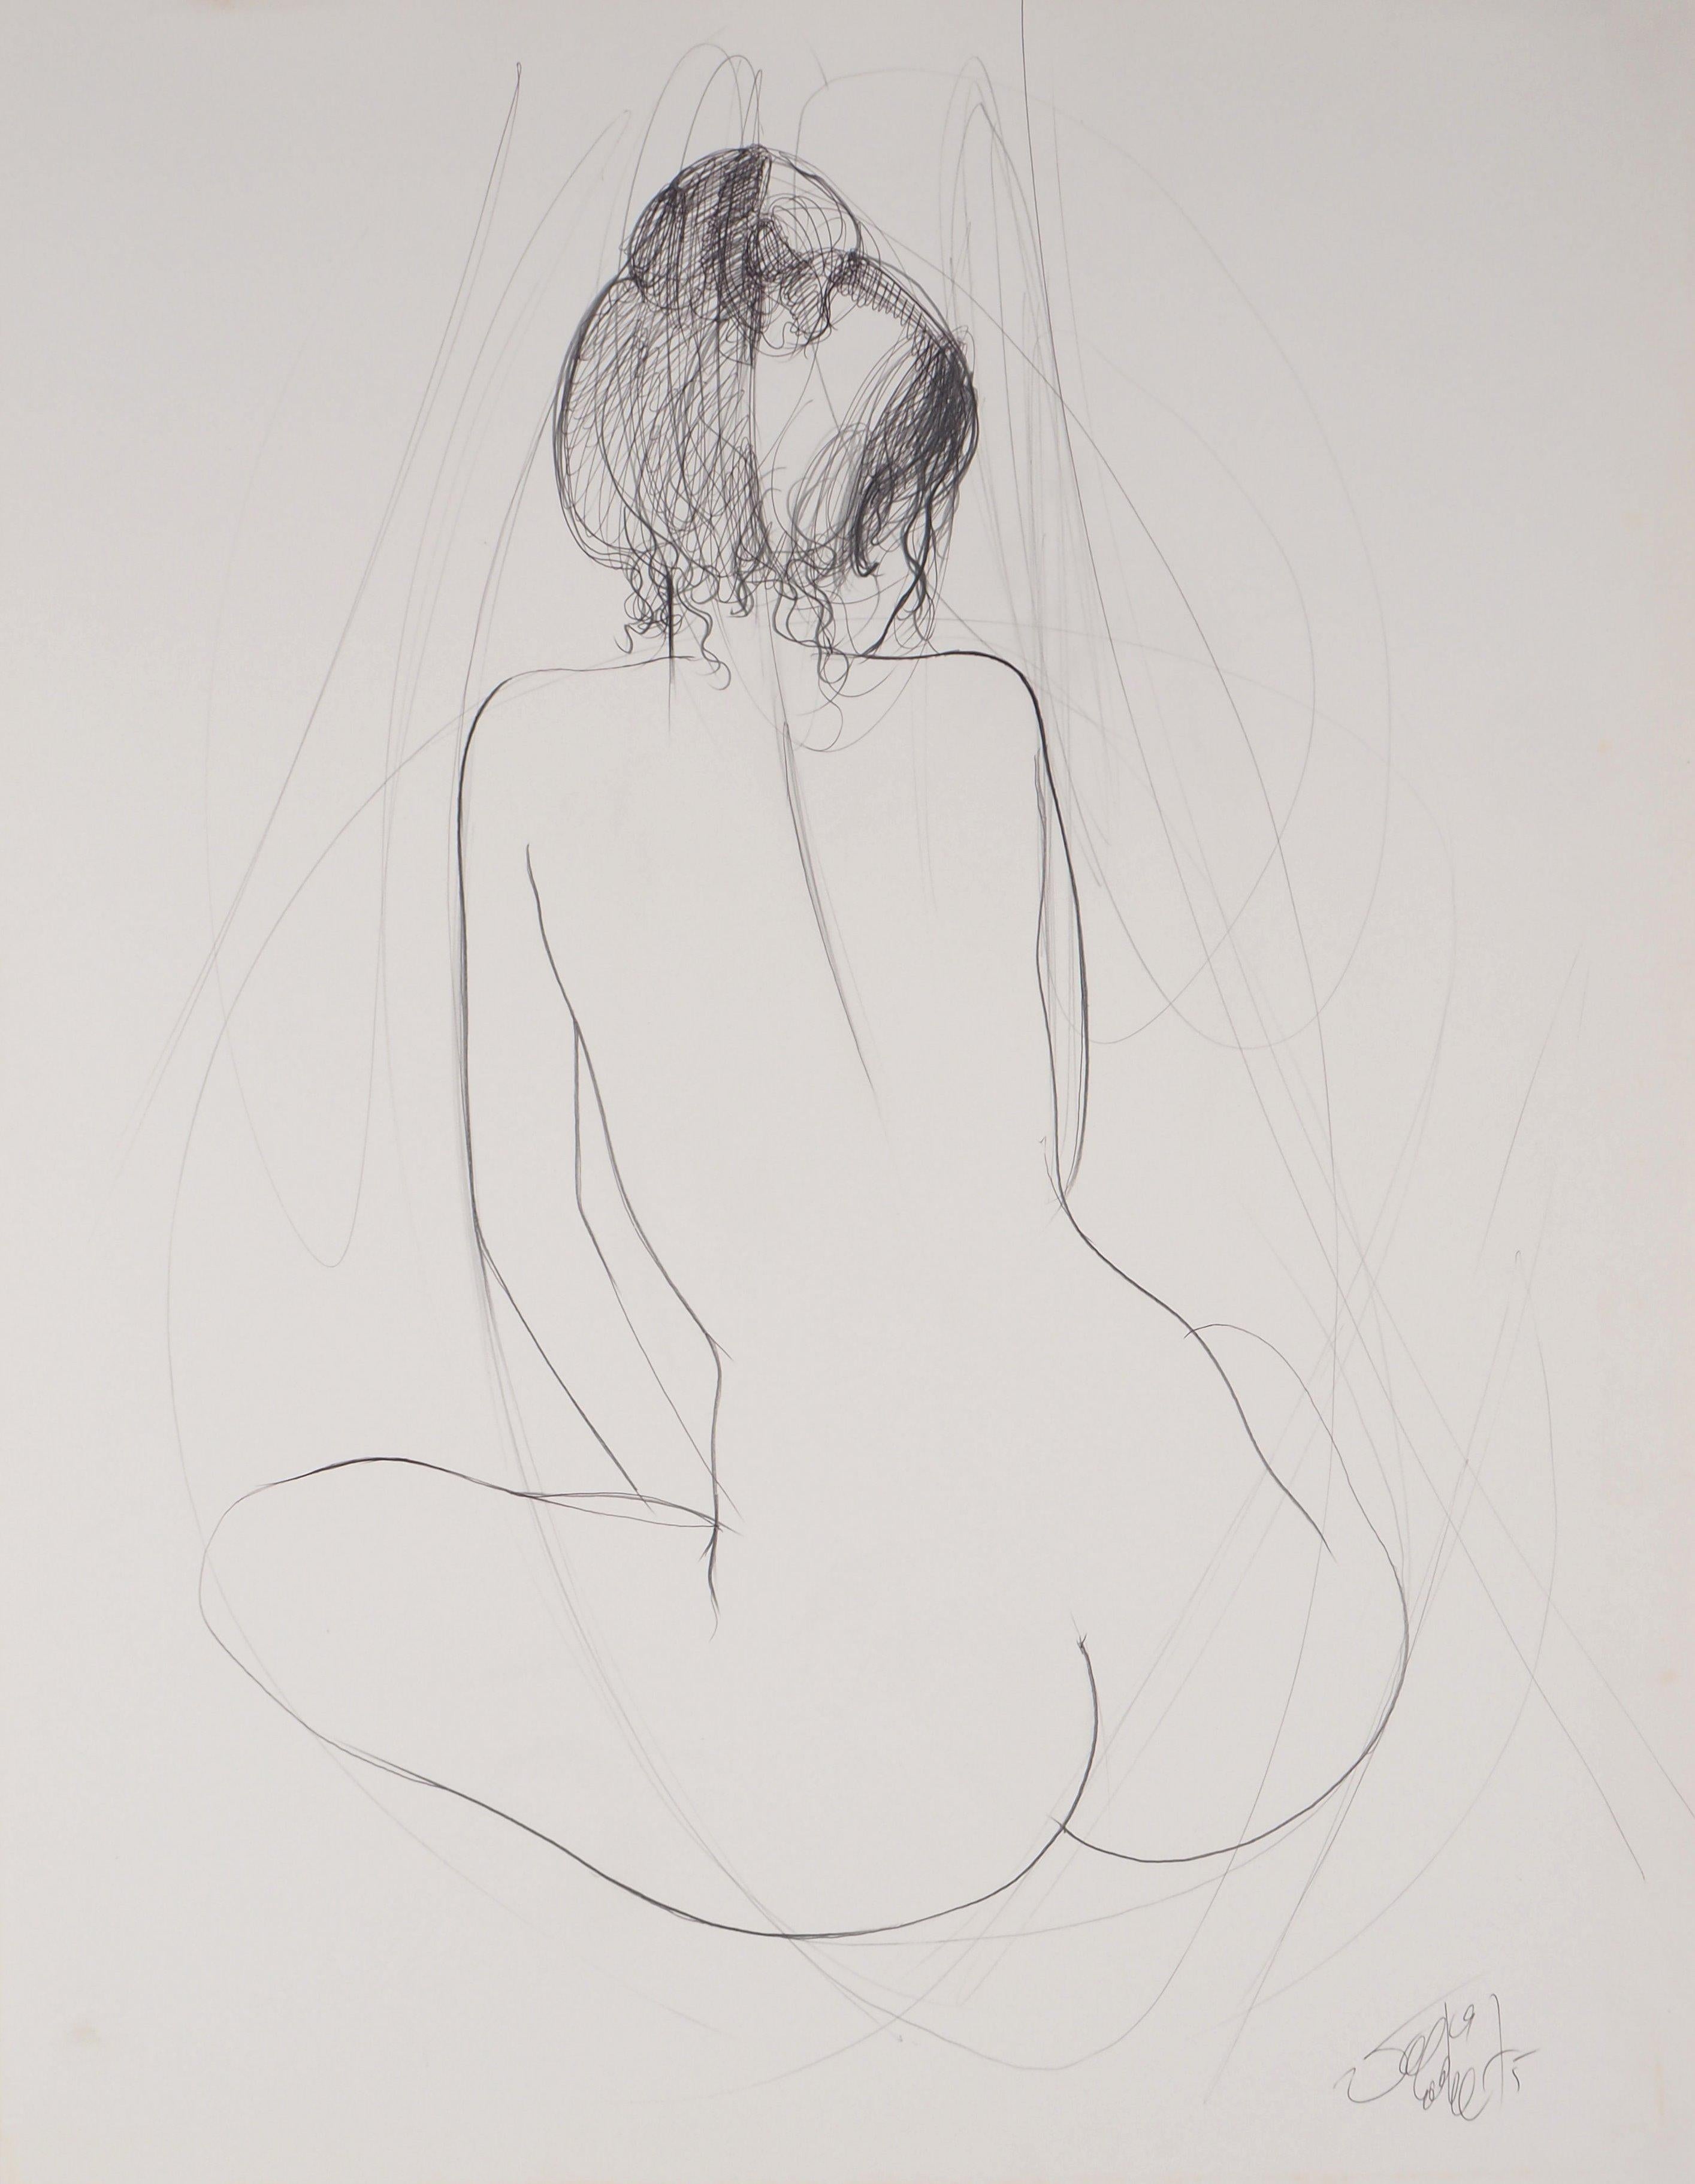 Seated Nude - Original pencil drawing, Handsigned - Art by Jean-Baptiste Valadie